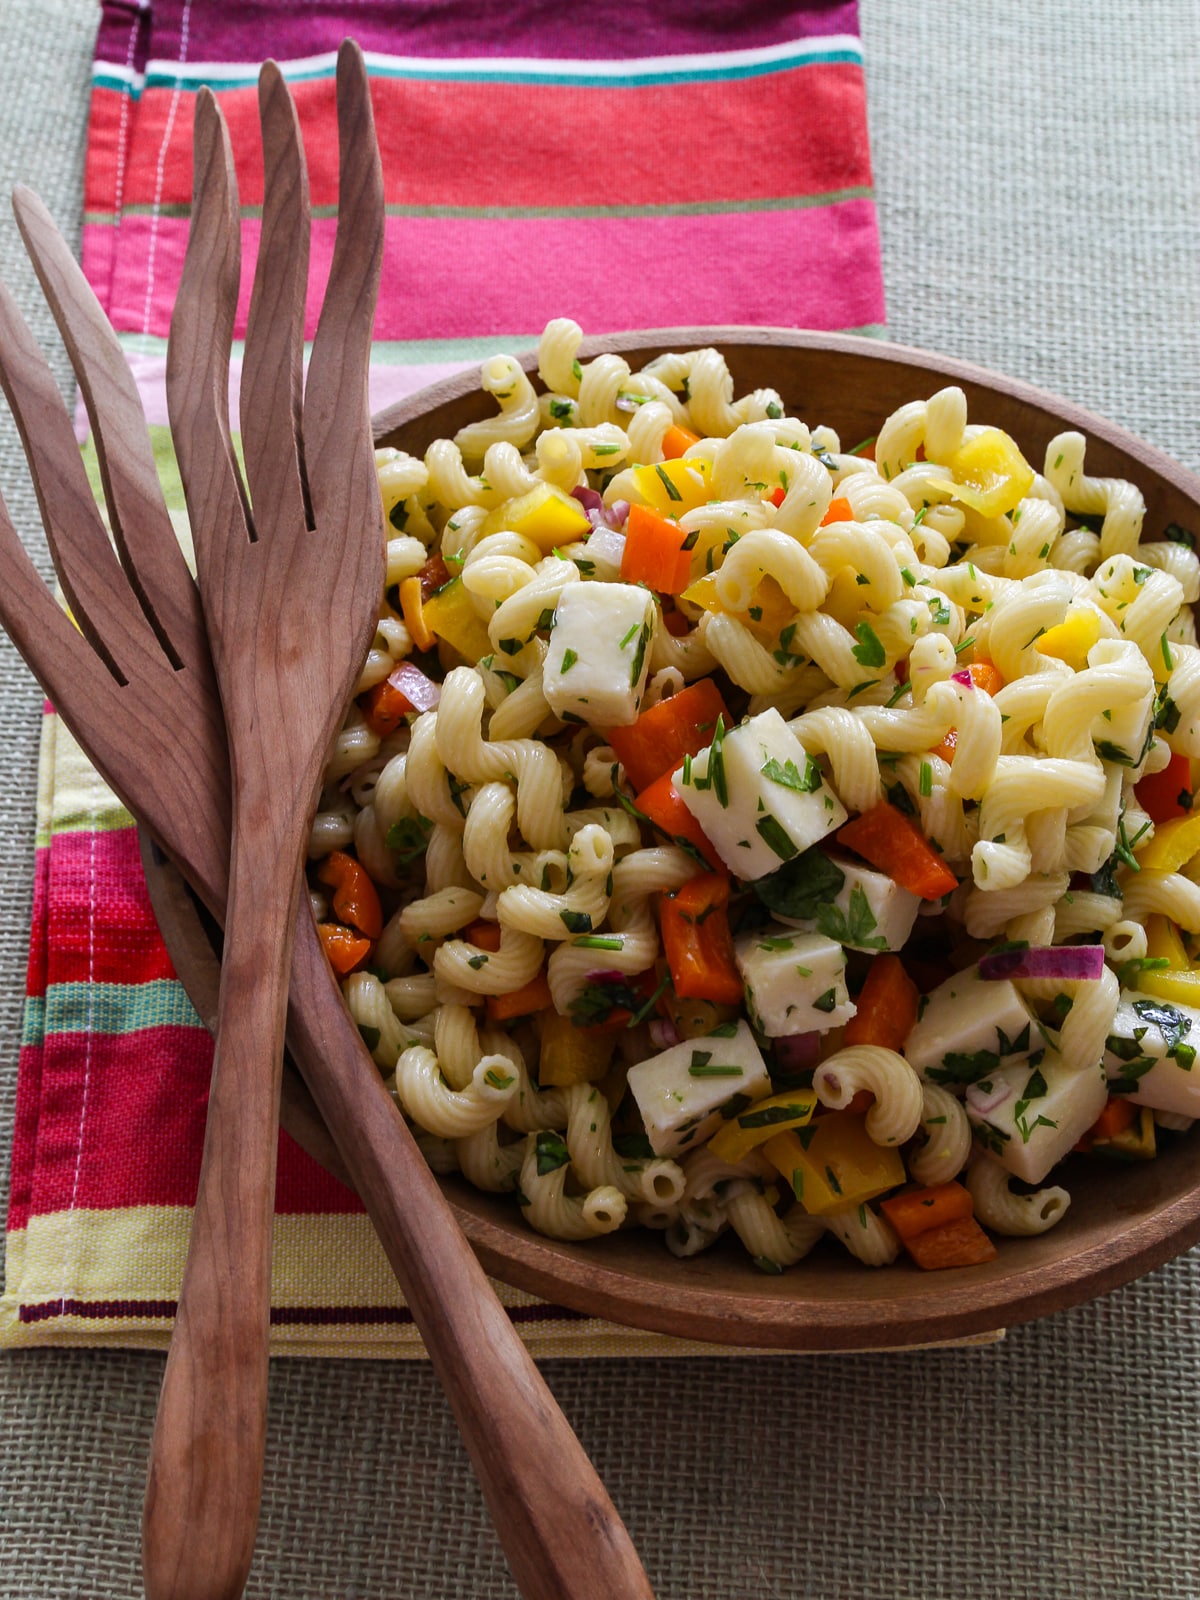 Pasta salad in a wood bowl with serving wood tongs on a colorful towel. 